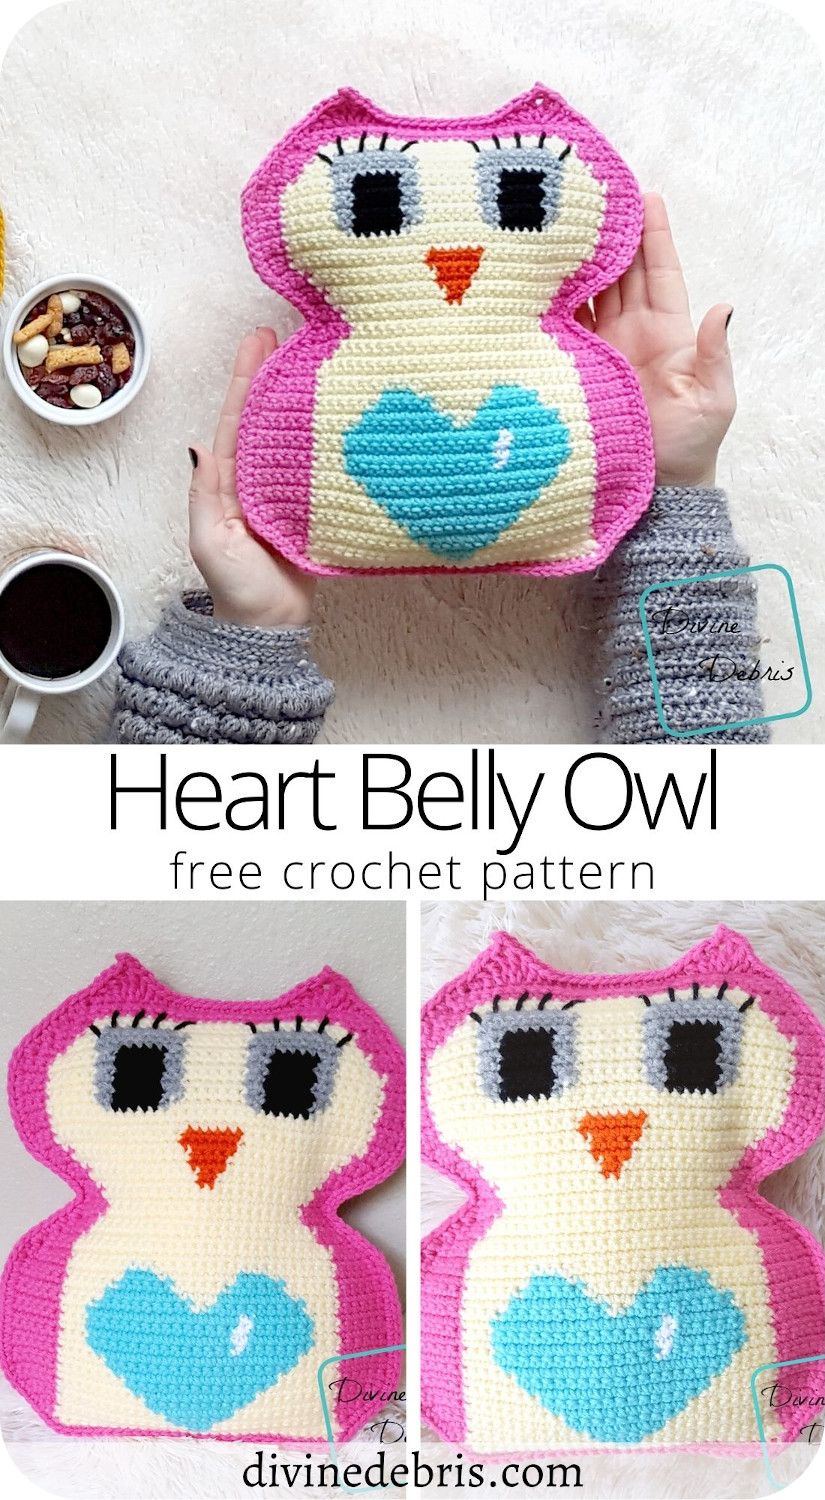 Learn to make the fun Valentine's Day themed Heart Belly Owl Amigurumi free crochet pattern by DivineDebris.com